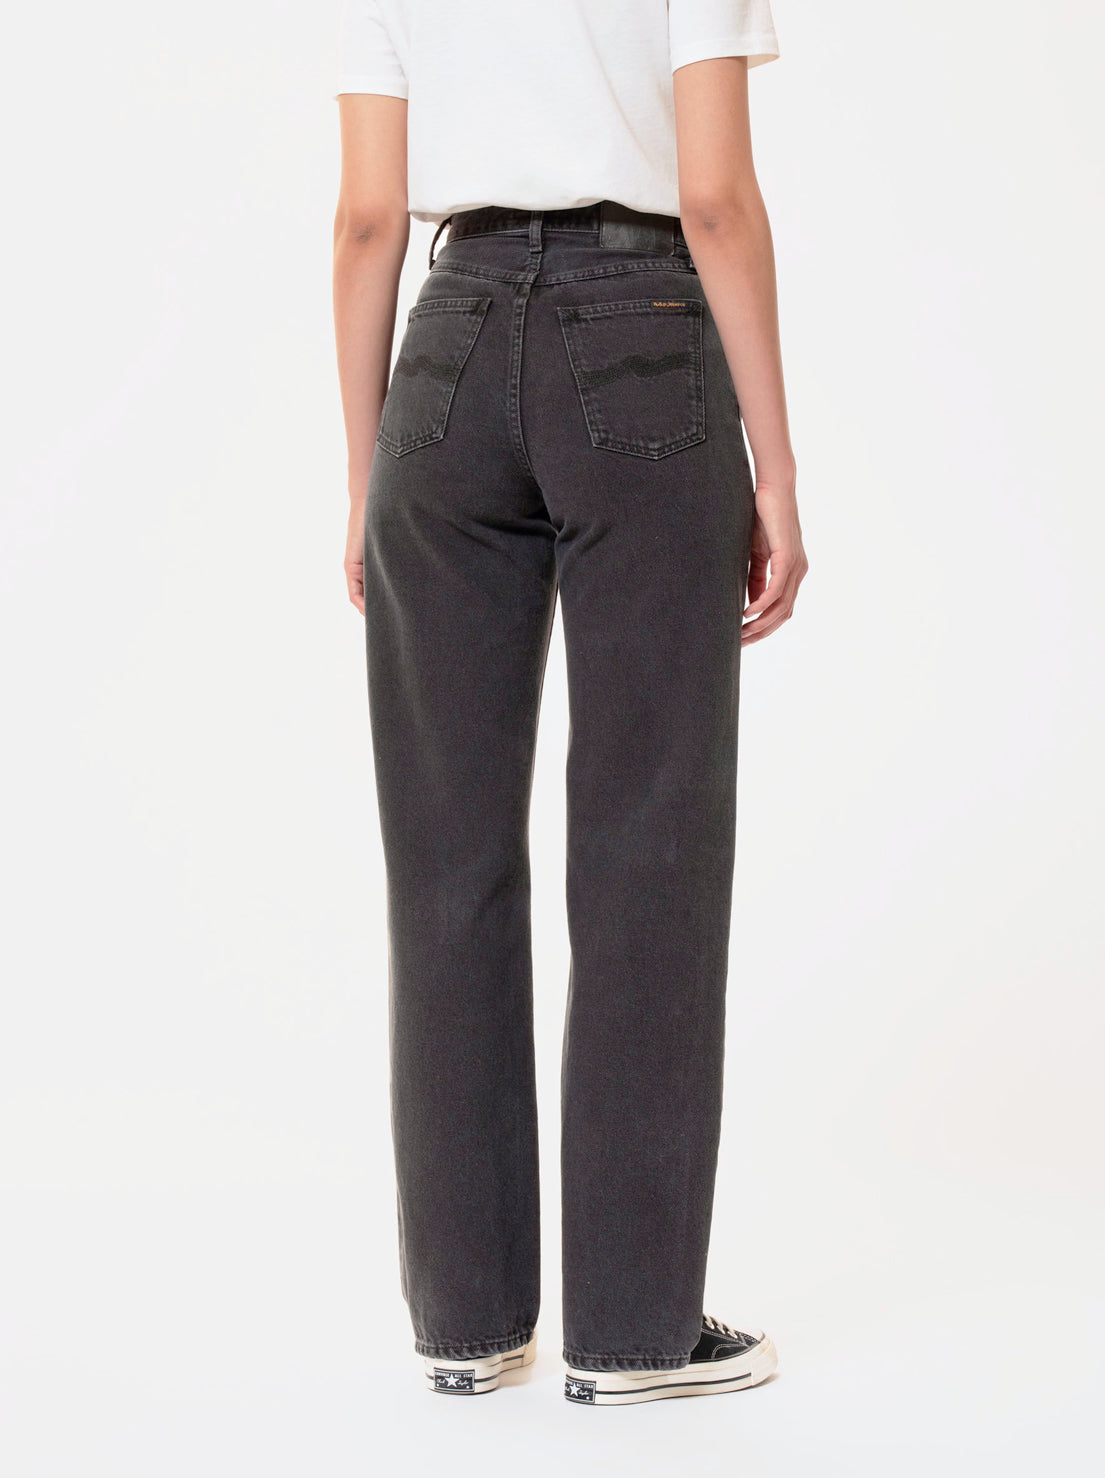 Nudie - Clean Eileen - Washed Out Black - L28